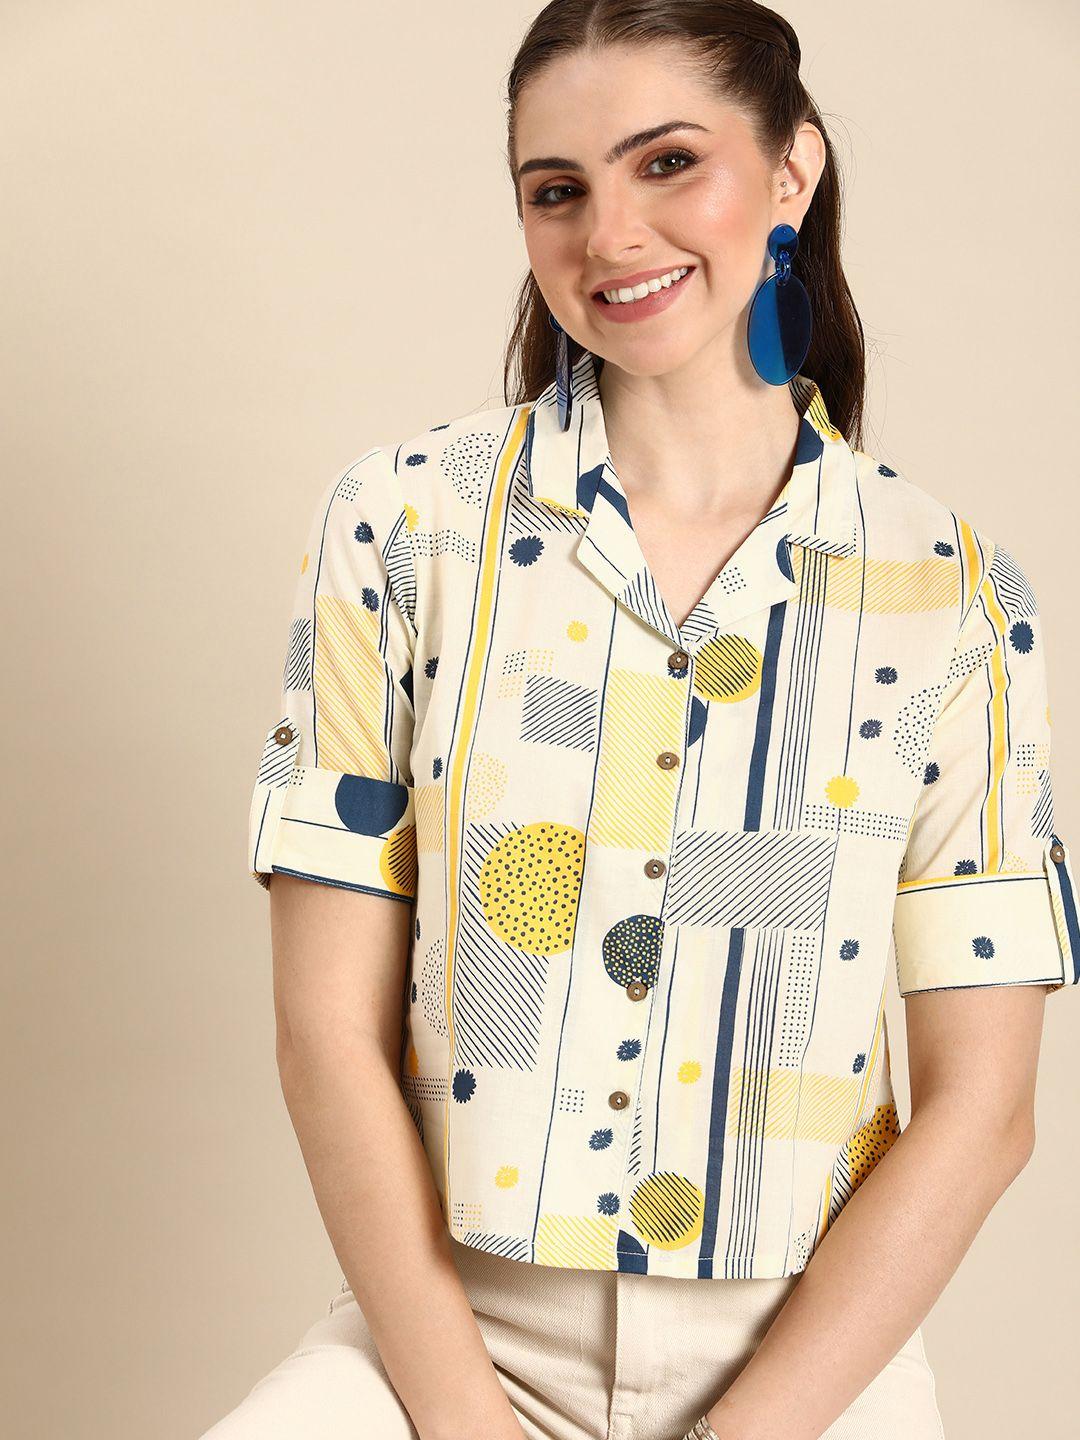 anouk-geometric-print-roll-up-sleeves-cotton-shirt-style-crop-top